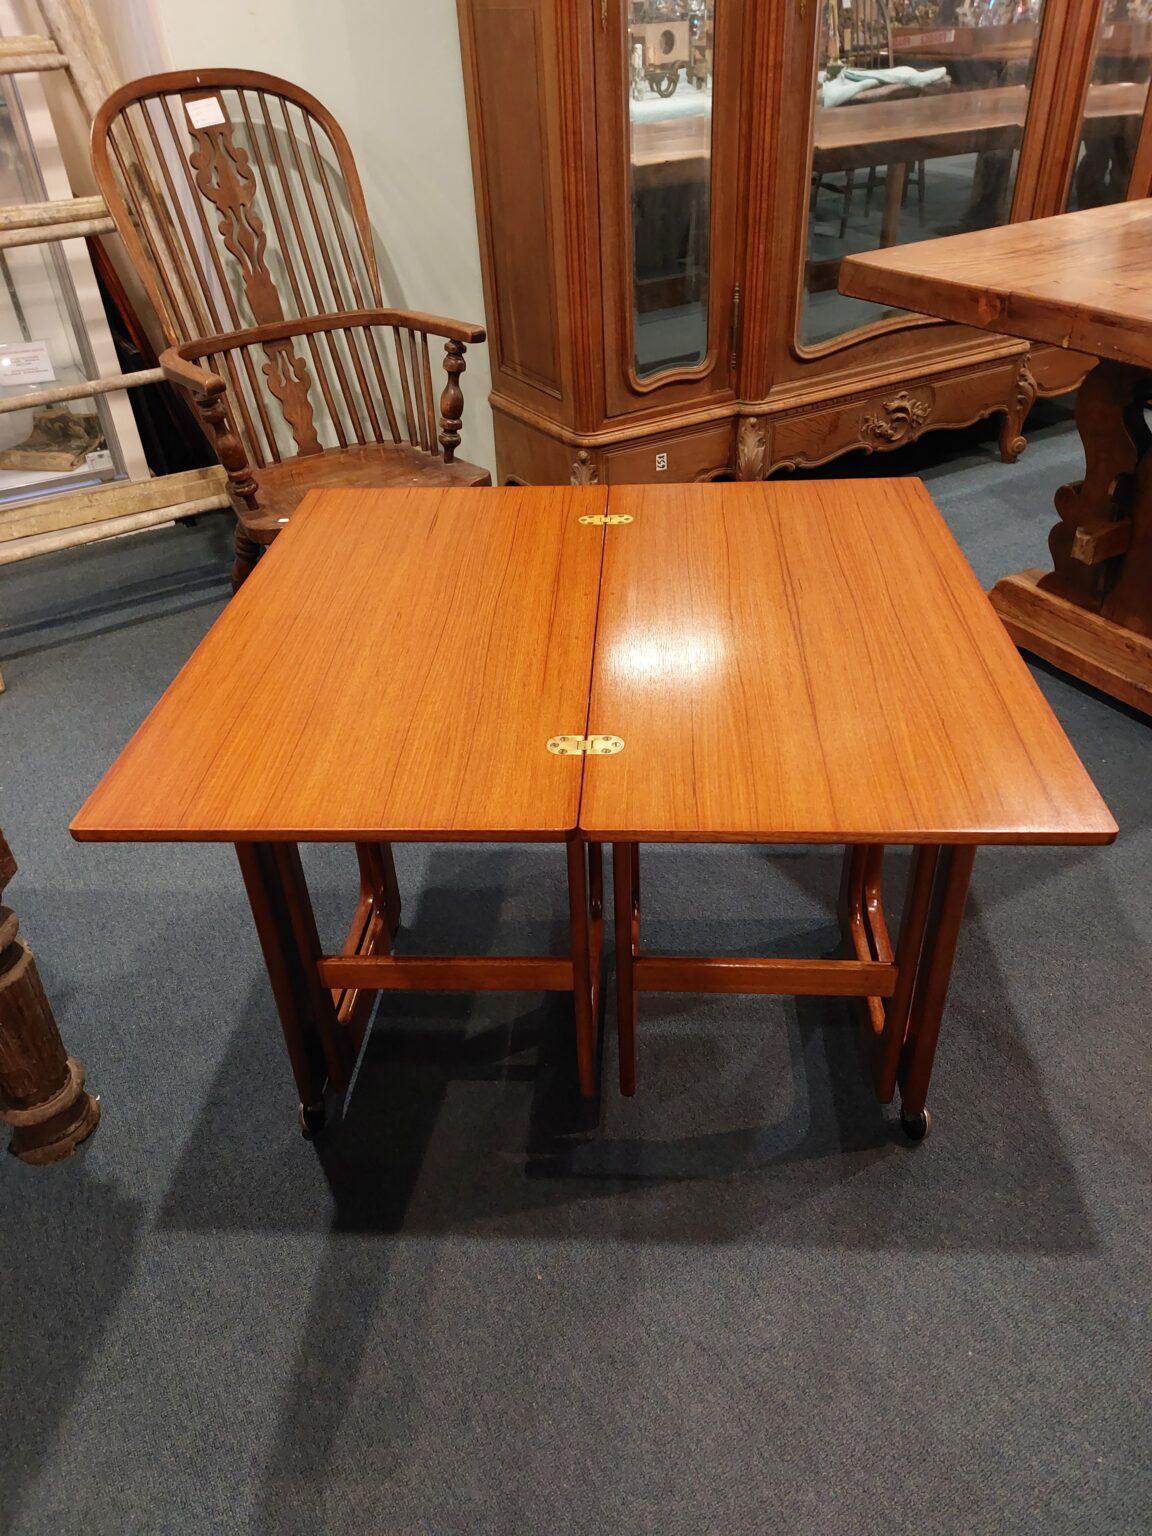 McIntosh nest of tables. Larger table folds out. Town and Country Antiques